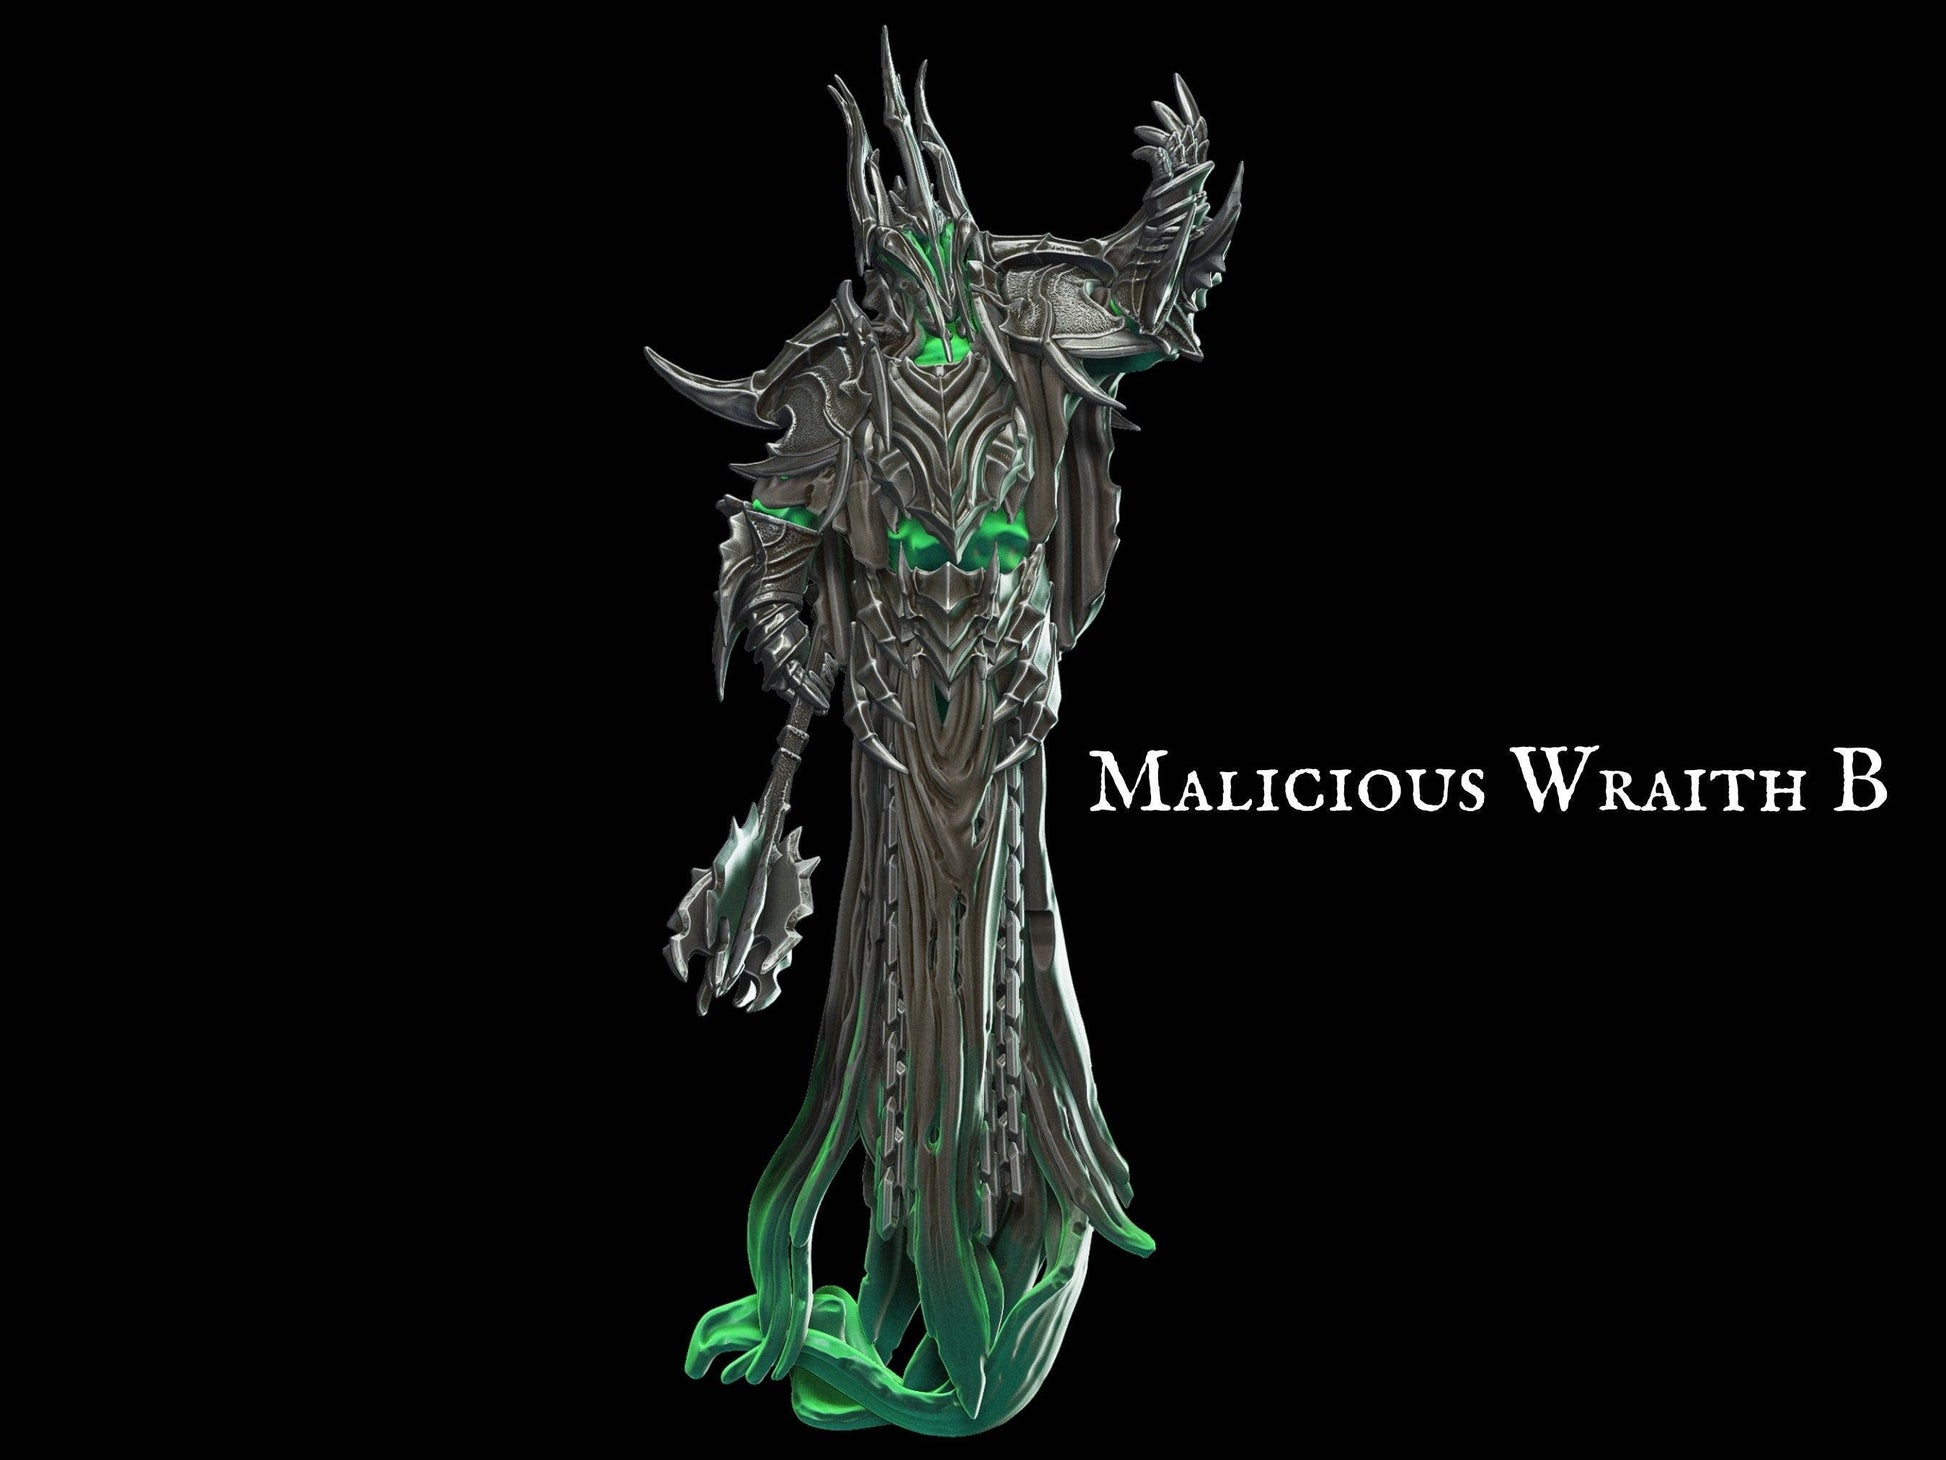 DnD Malicious Wraith Miniature - 3 Poses - 28mm scale Tabletop gaming DnD Miniature Dungeons and Dragons, ttrpg dnd 5e dungeon master gift - Plague Miniatures shop for DnD Miniatures